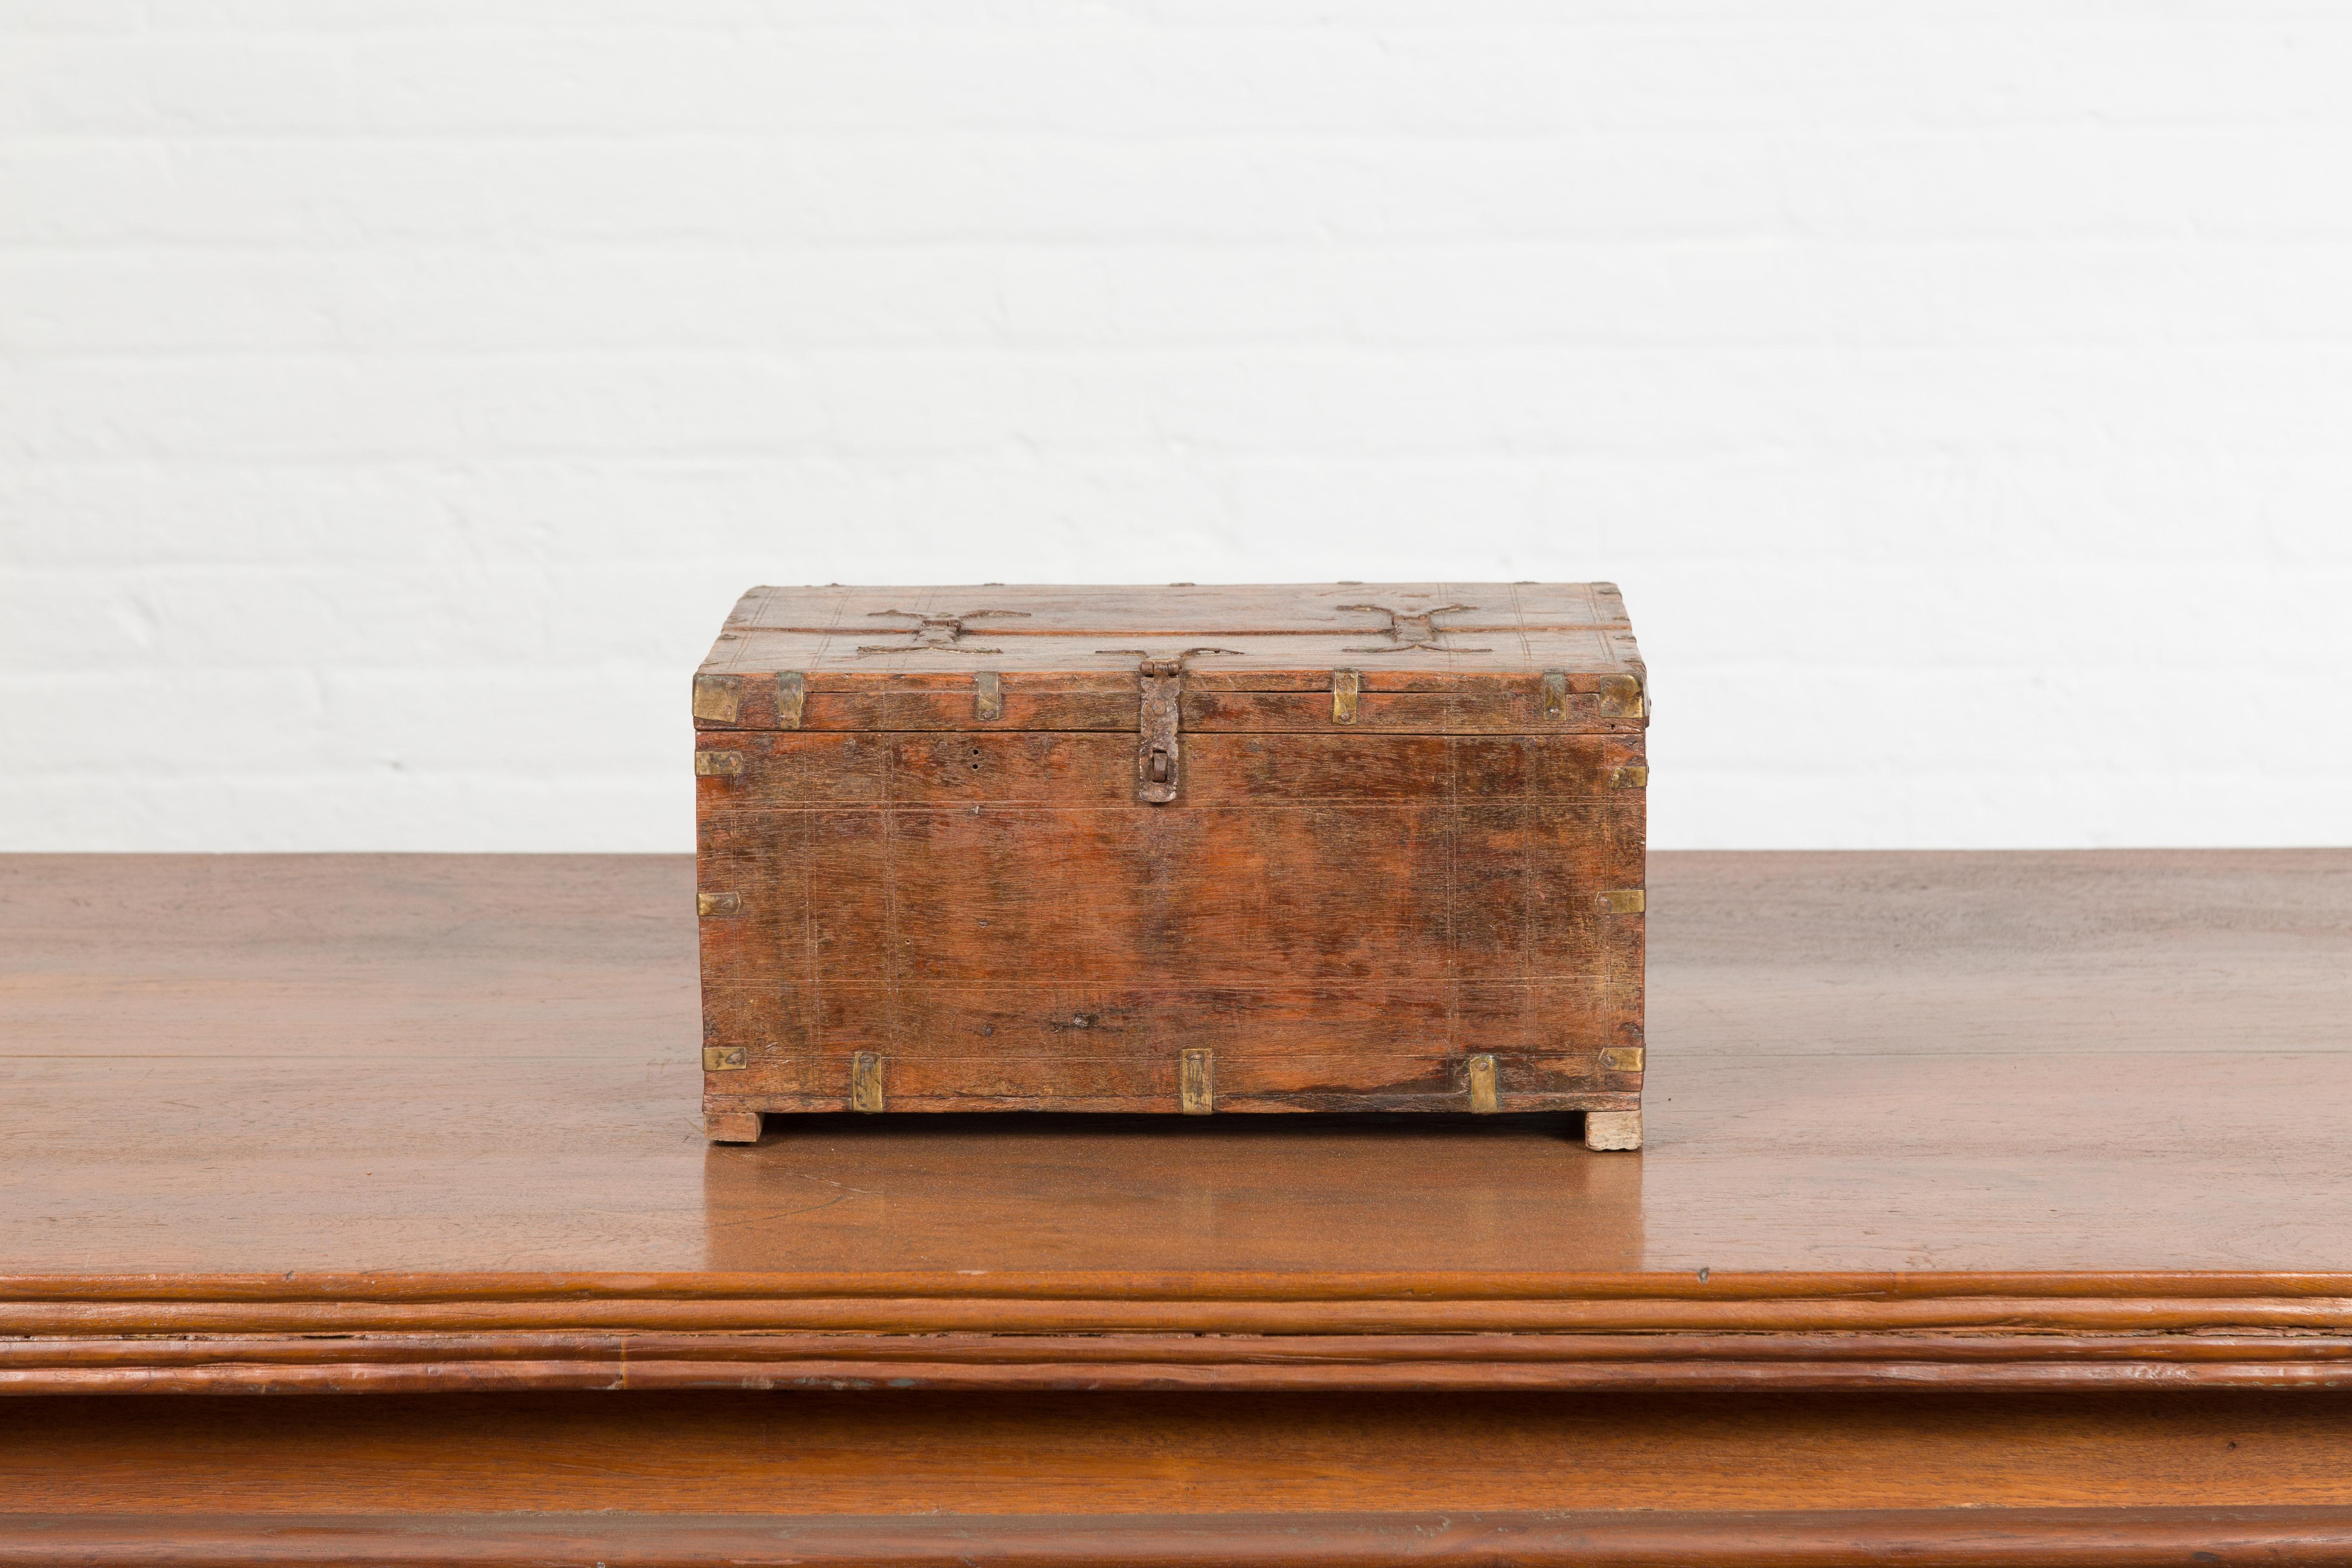 A small Indian antique box from the 19th century, with brass details and compartmented interior. Created in India during the 19th century, this small wooden box features a rectangular lid half opening to reveal a partitioned interior. Accented with